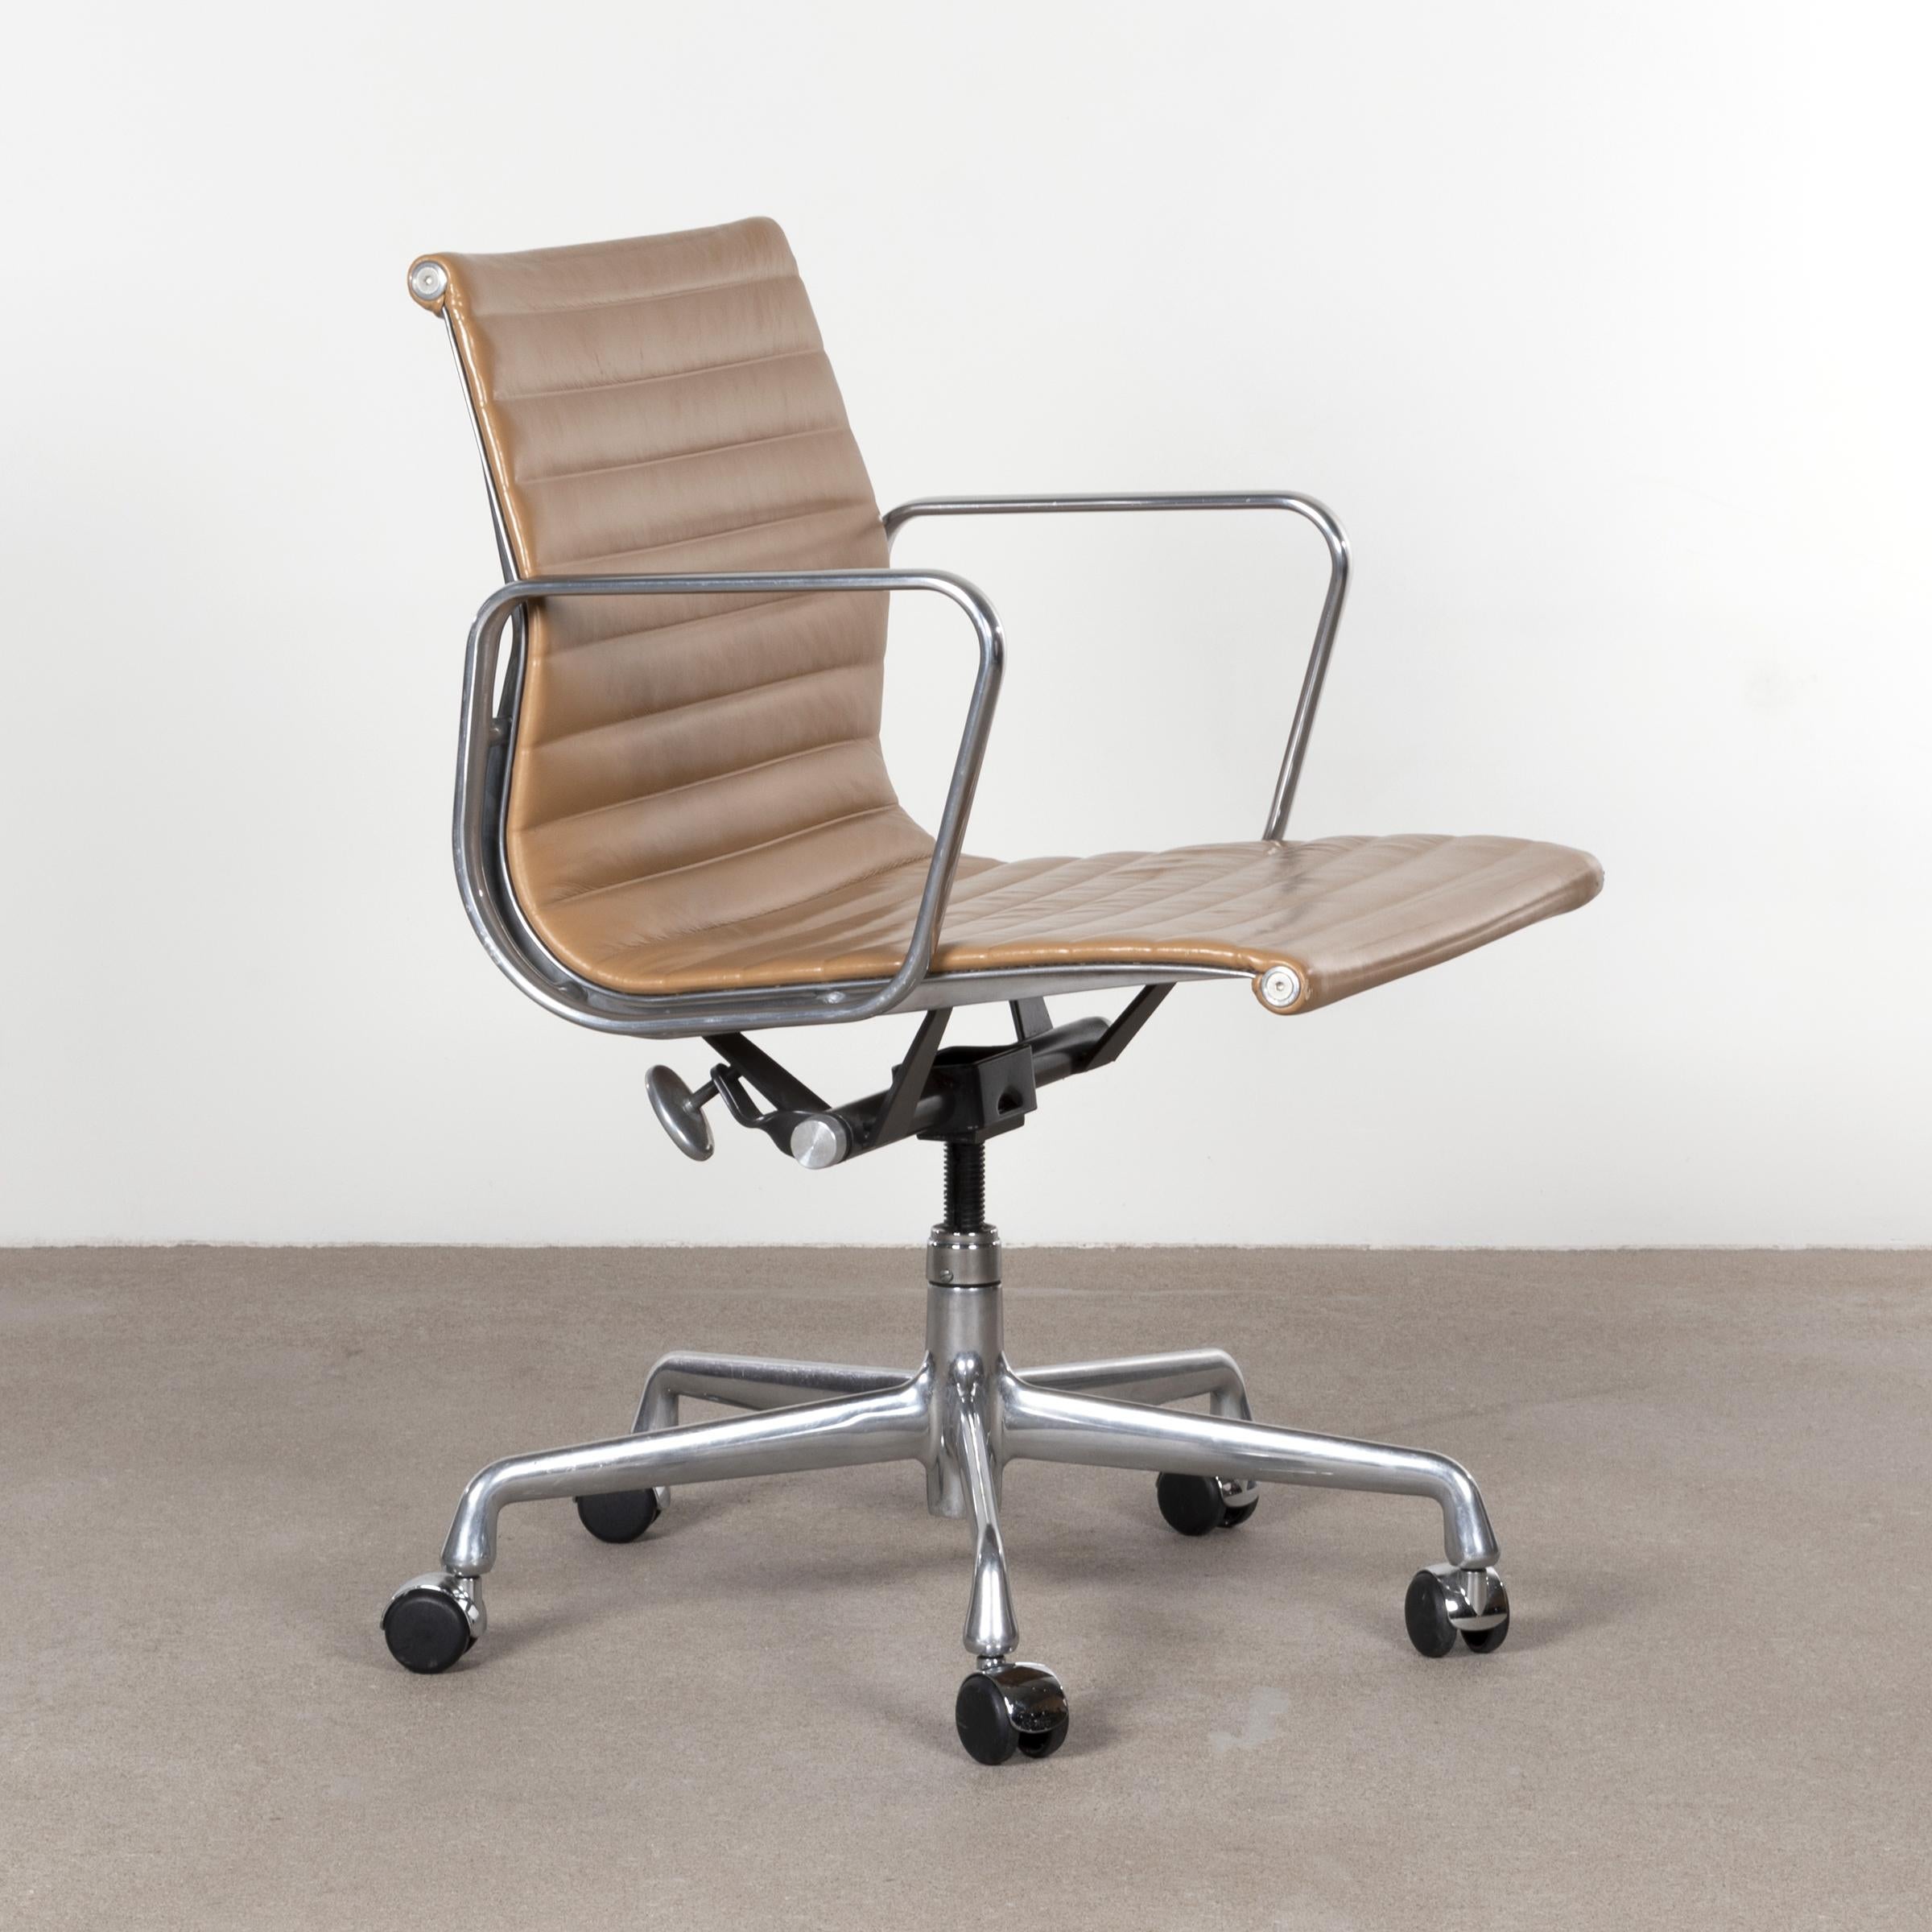 Aluminum Multiple Eames Management Office Chair in Cognac Leather for Herman Miller